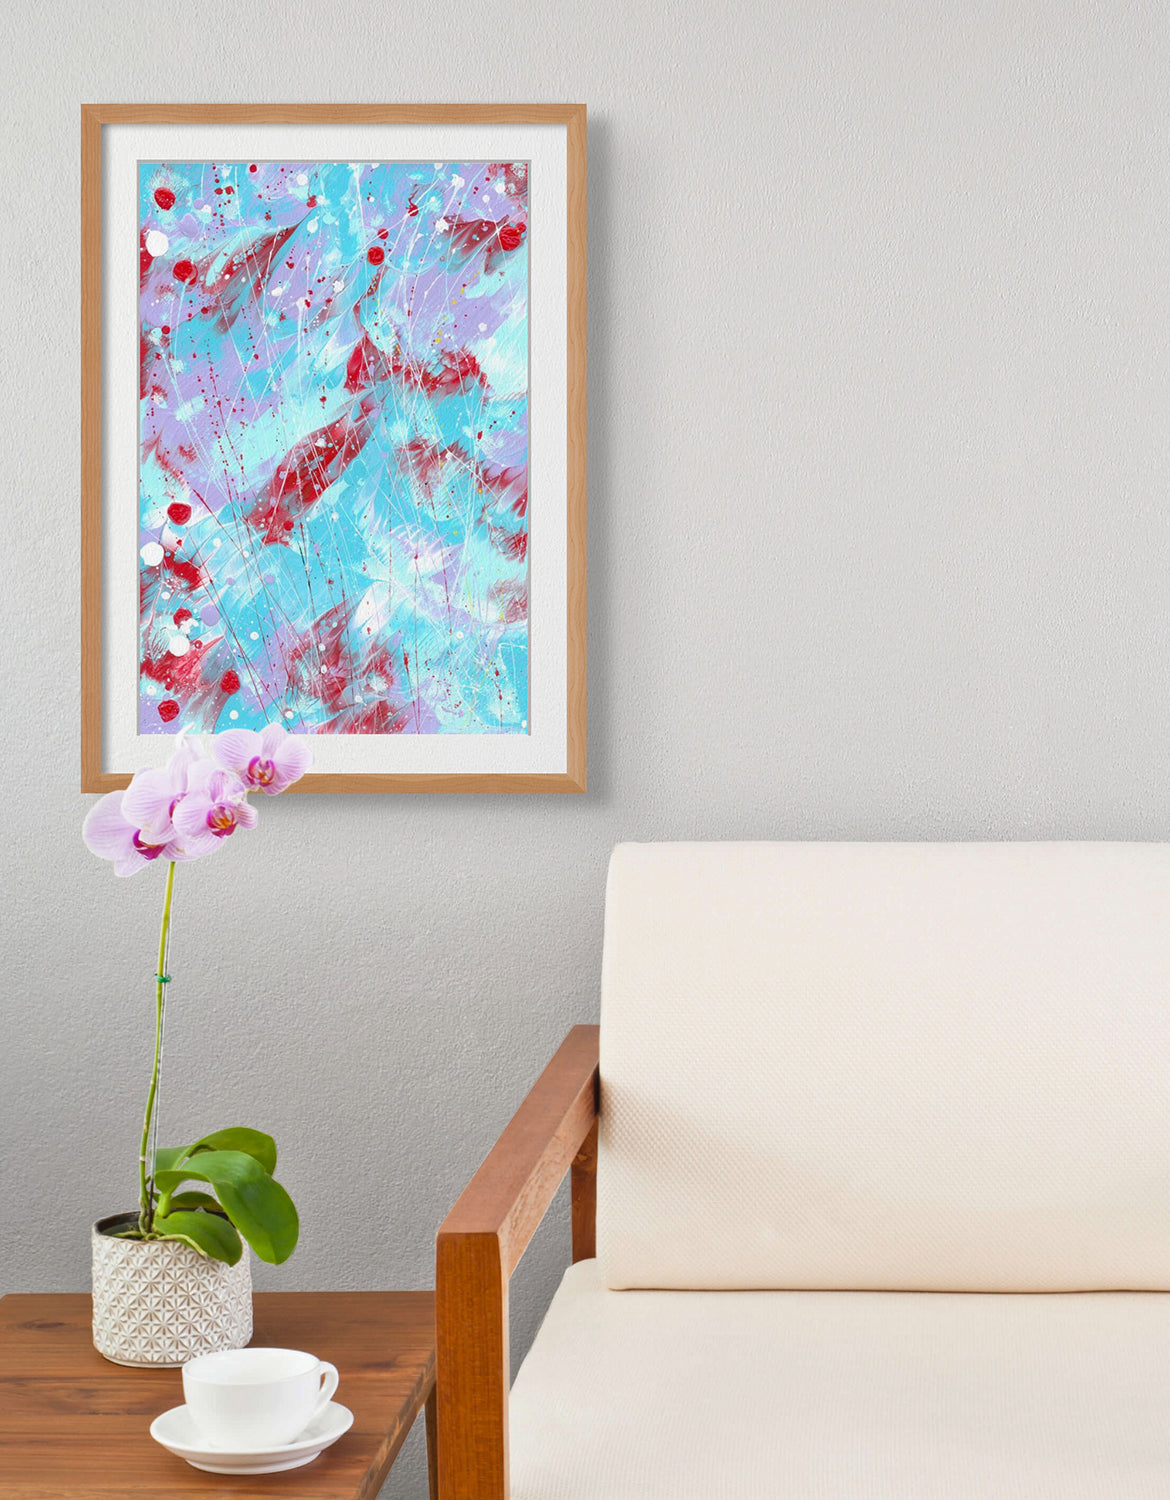 'Butterfly 5' Butterfly Series an  Original Painting by Bridget Bradley seen Framed in Oak and Hanging Above Table. Fine Art Abstract on Paper. View now!